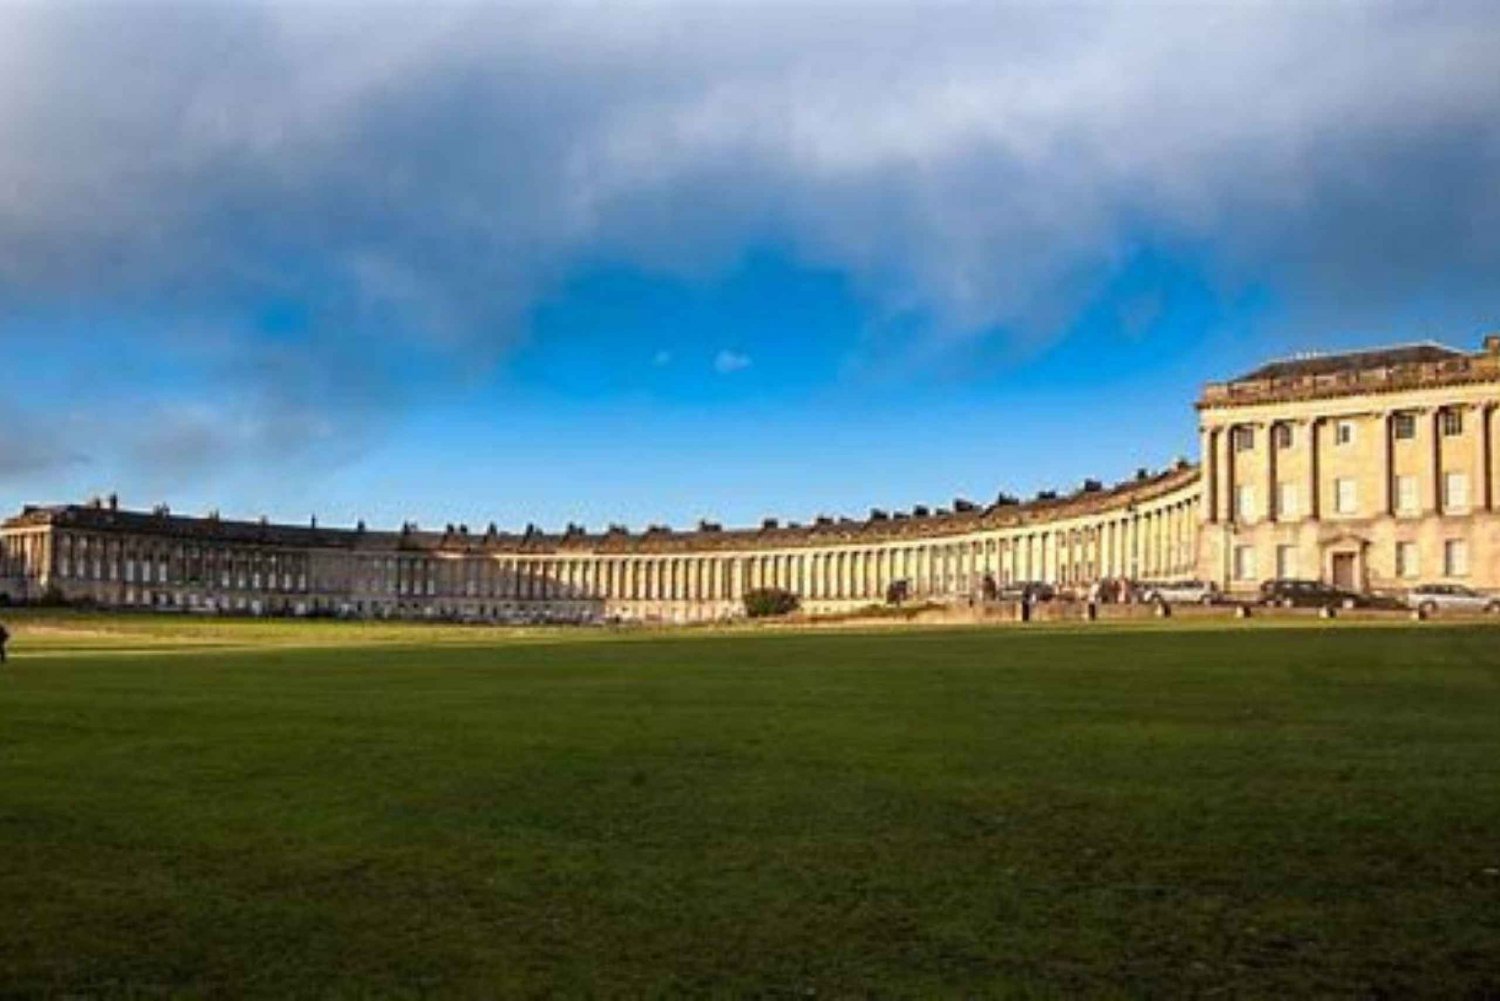 Bath: Guided walking tour of Historic Sights & Pubs (3h)